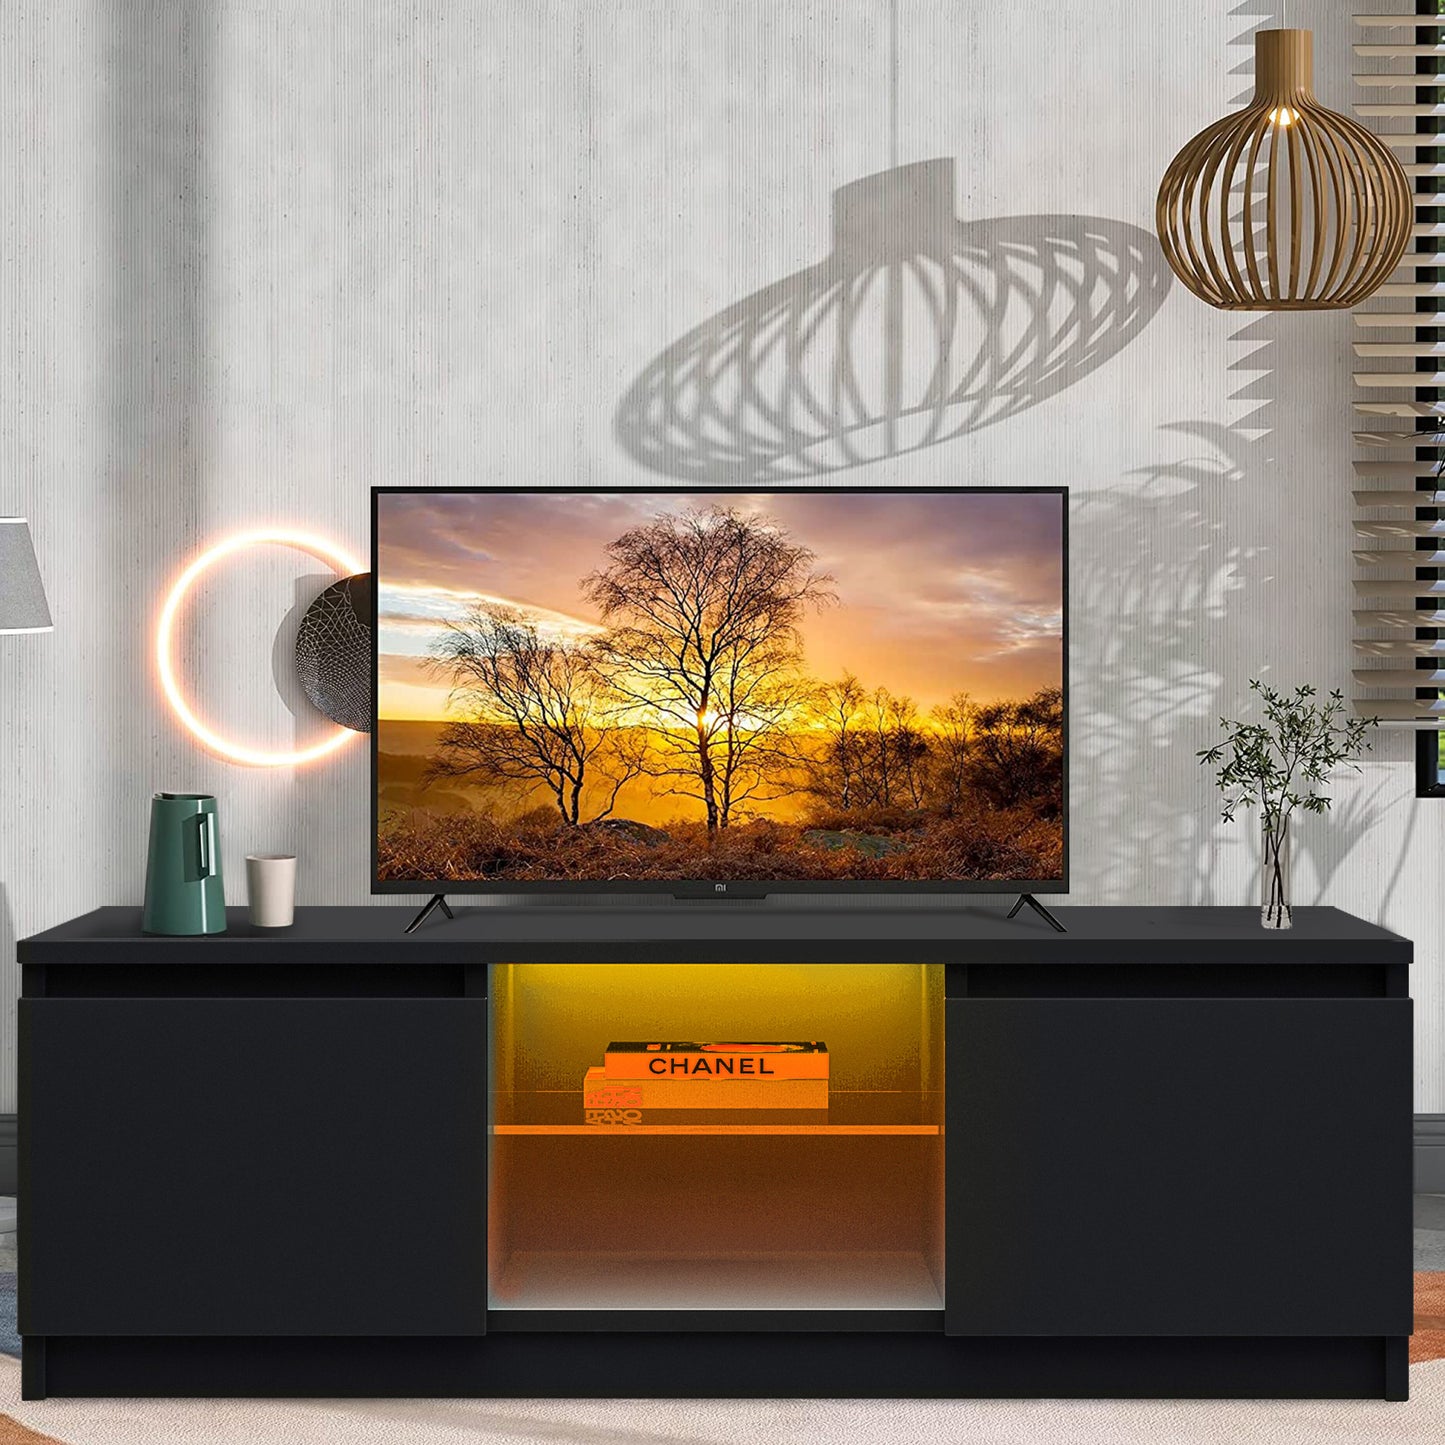 BTMWAY High Gloss TV Stand with 16 Colors LED Lights for 32-55 Inch TV, LJC